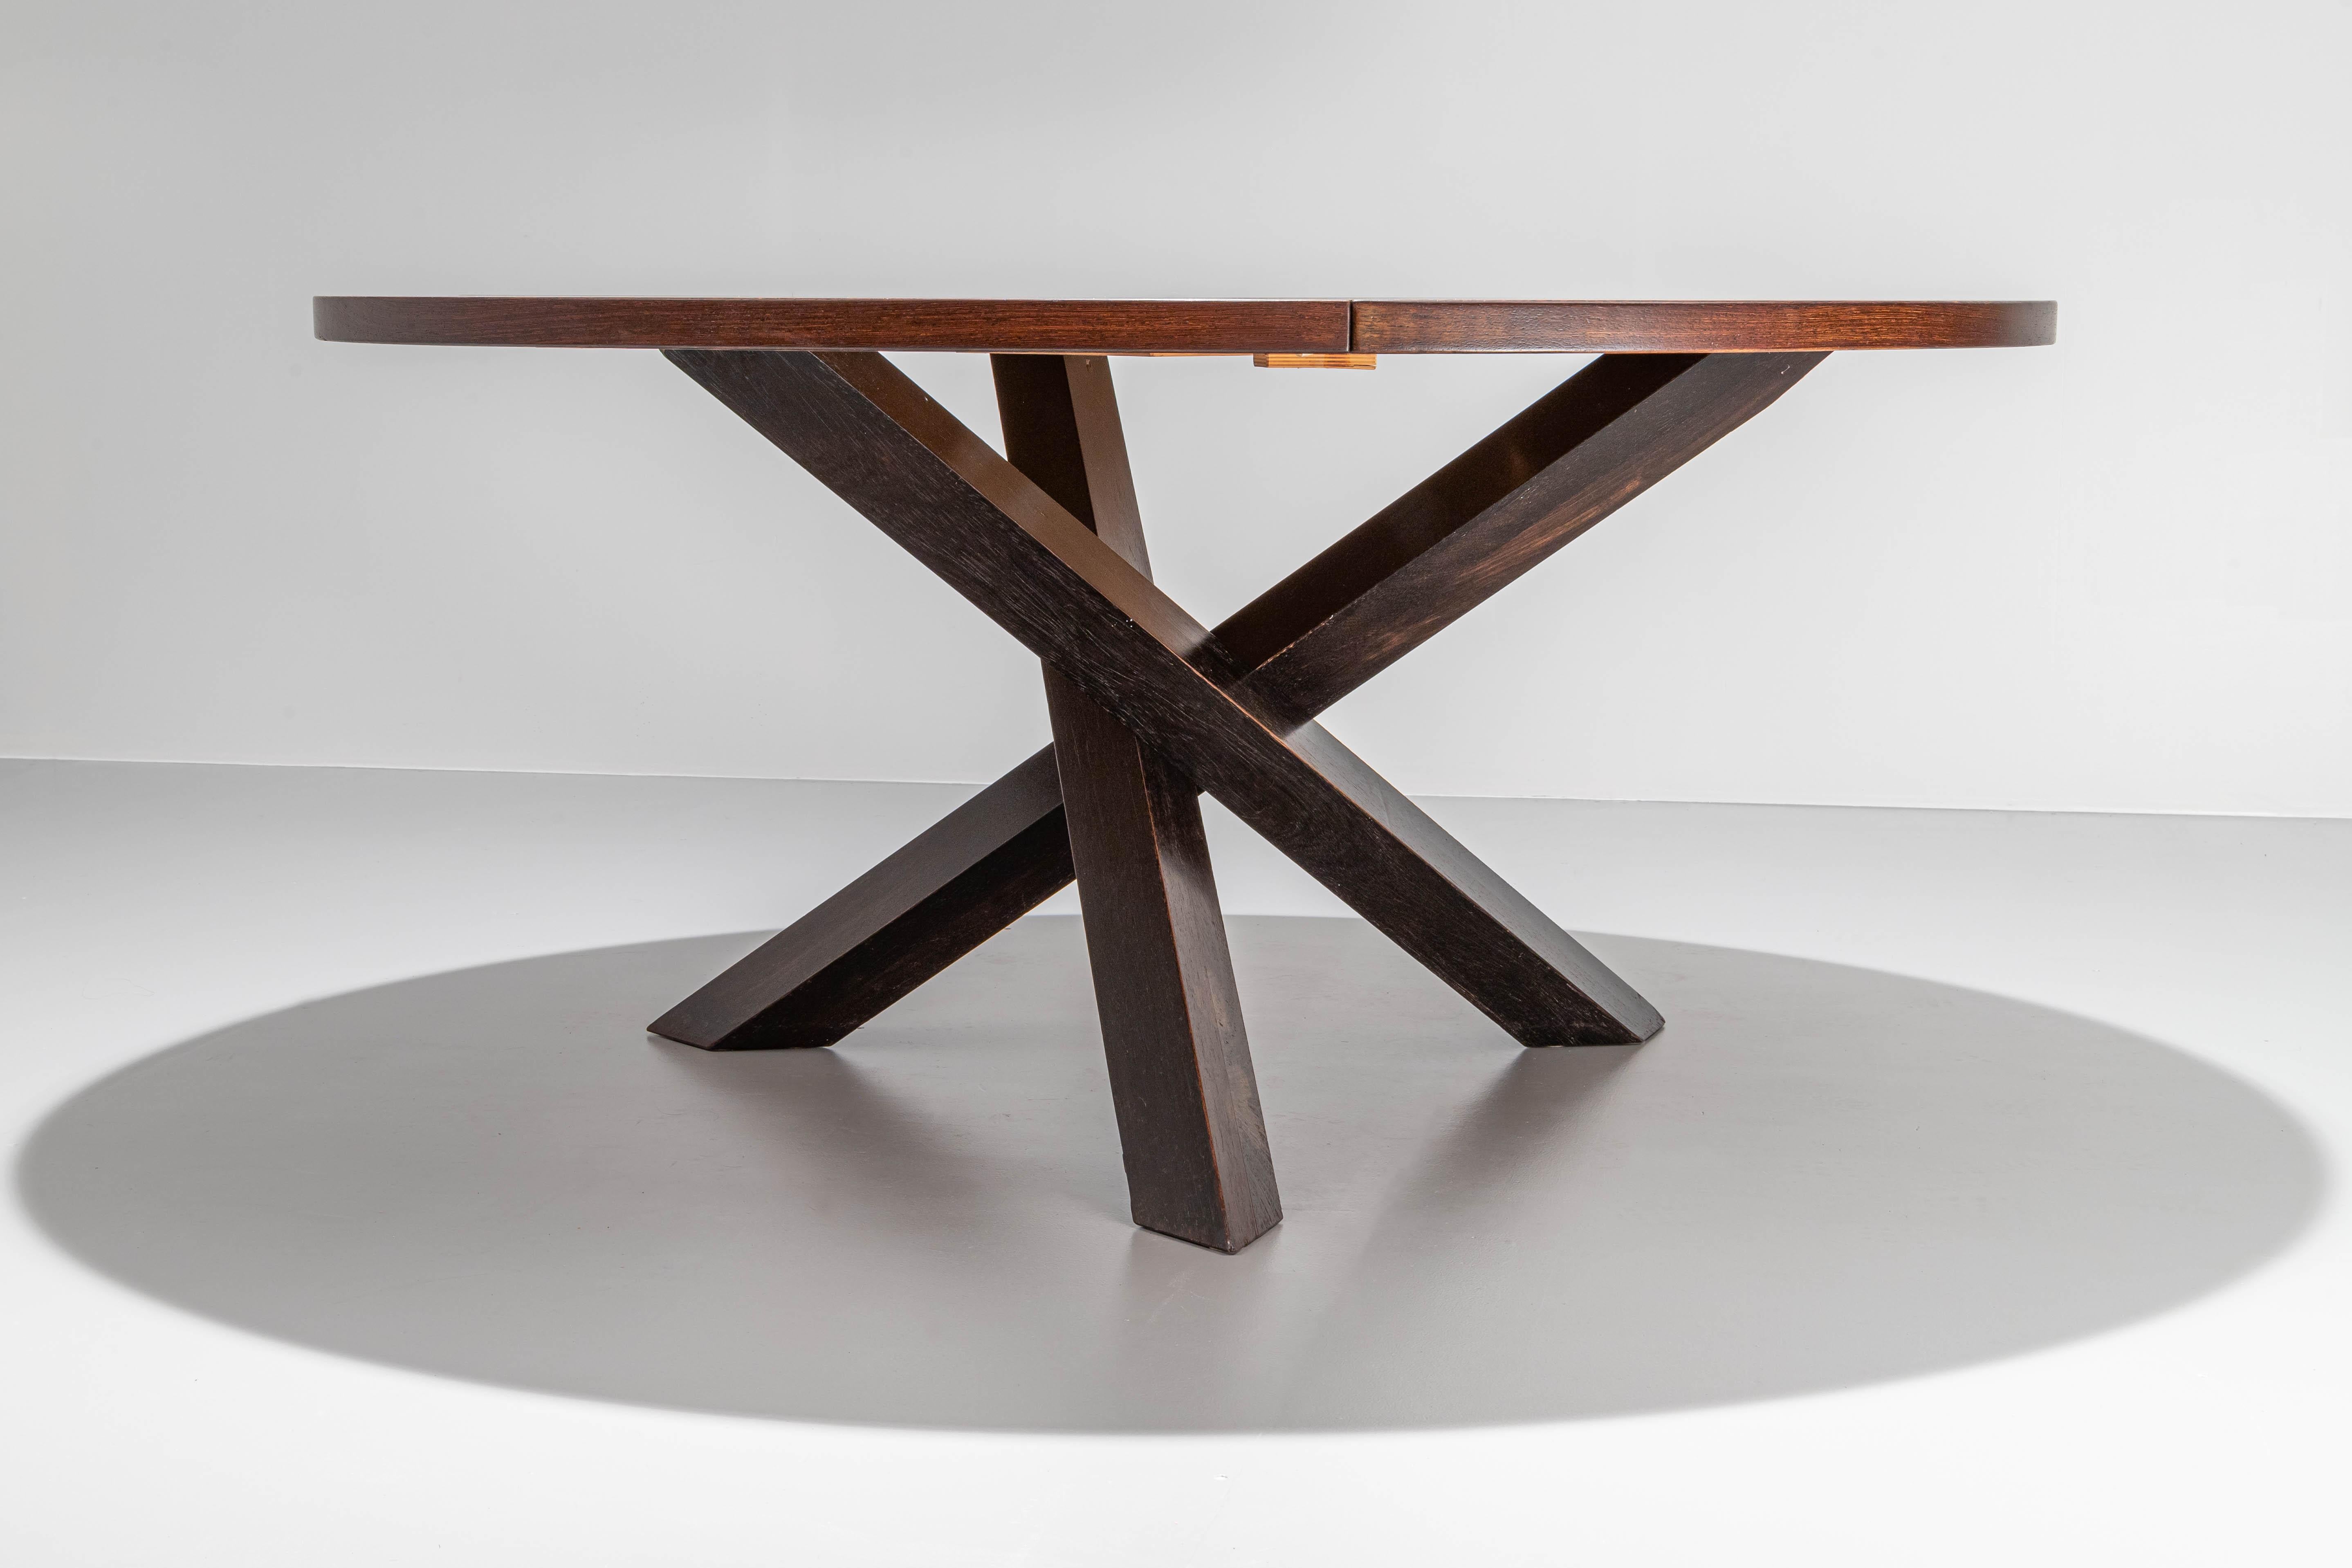 European Dining Table by Martin Visser for 't Spectrum in Wengé, the Netherlands, 1960's